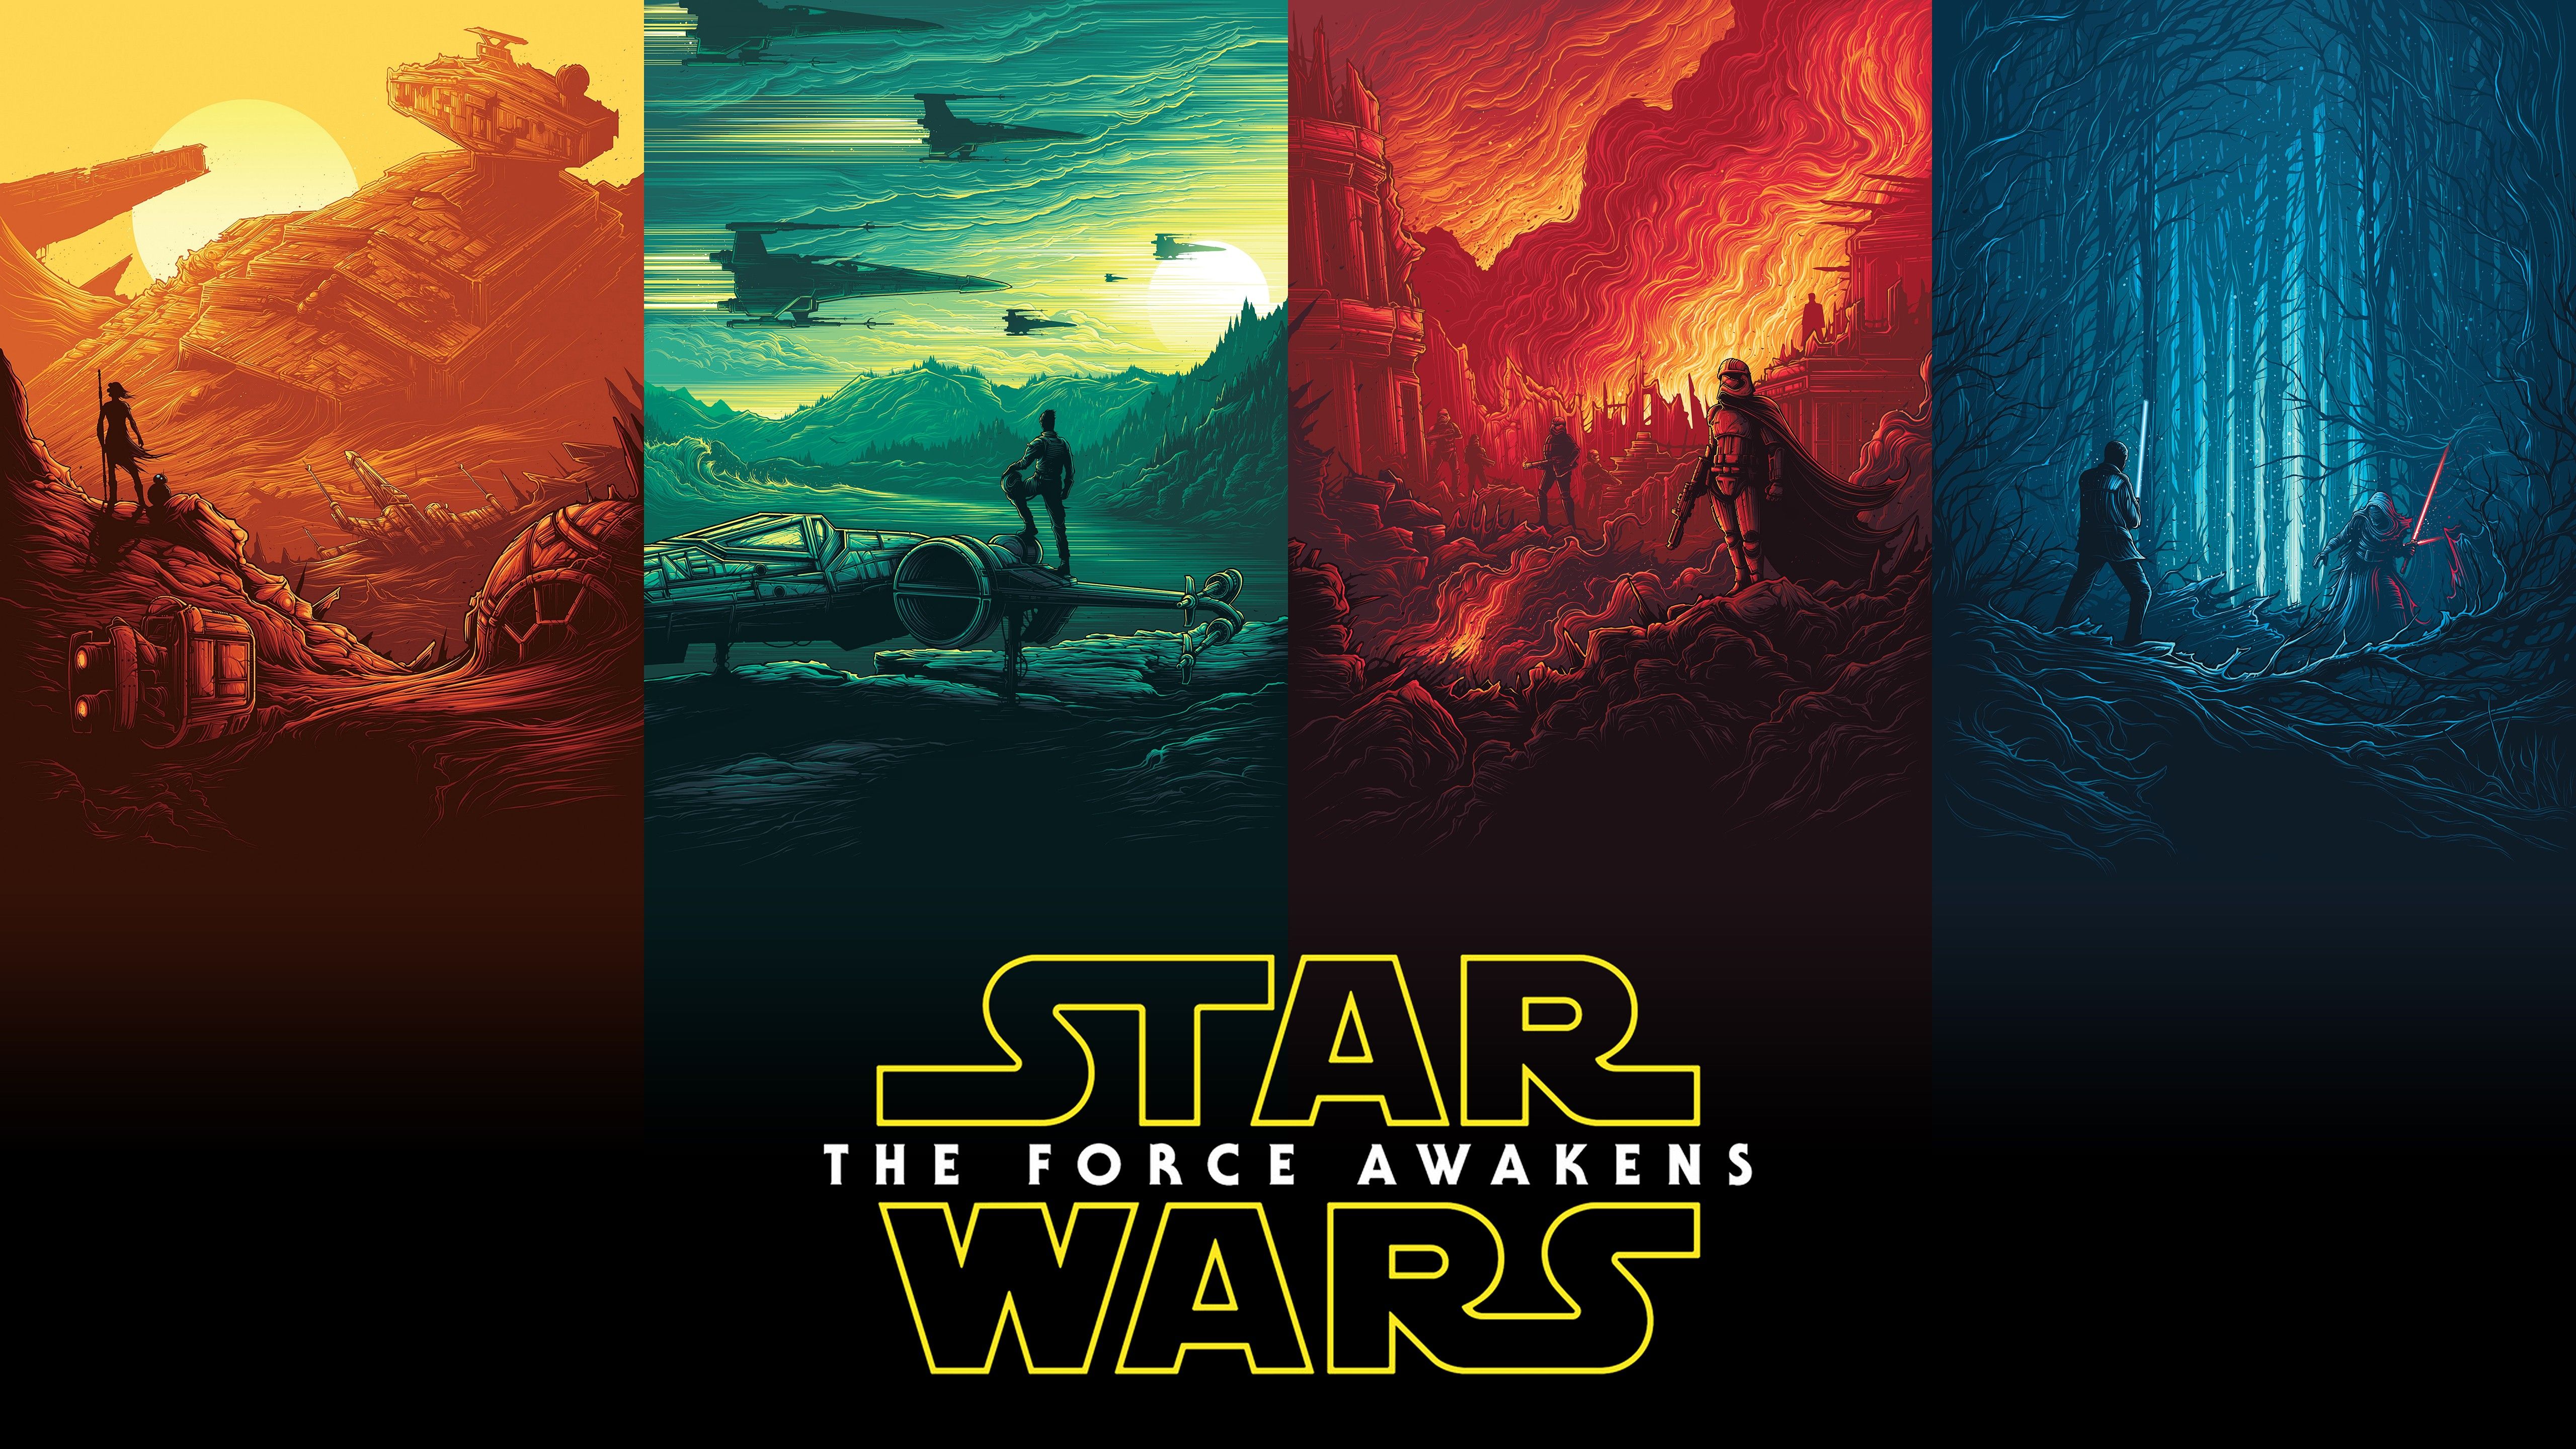 Star Wars 8 Cast Poster Wallpapers